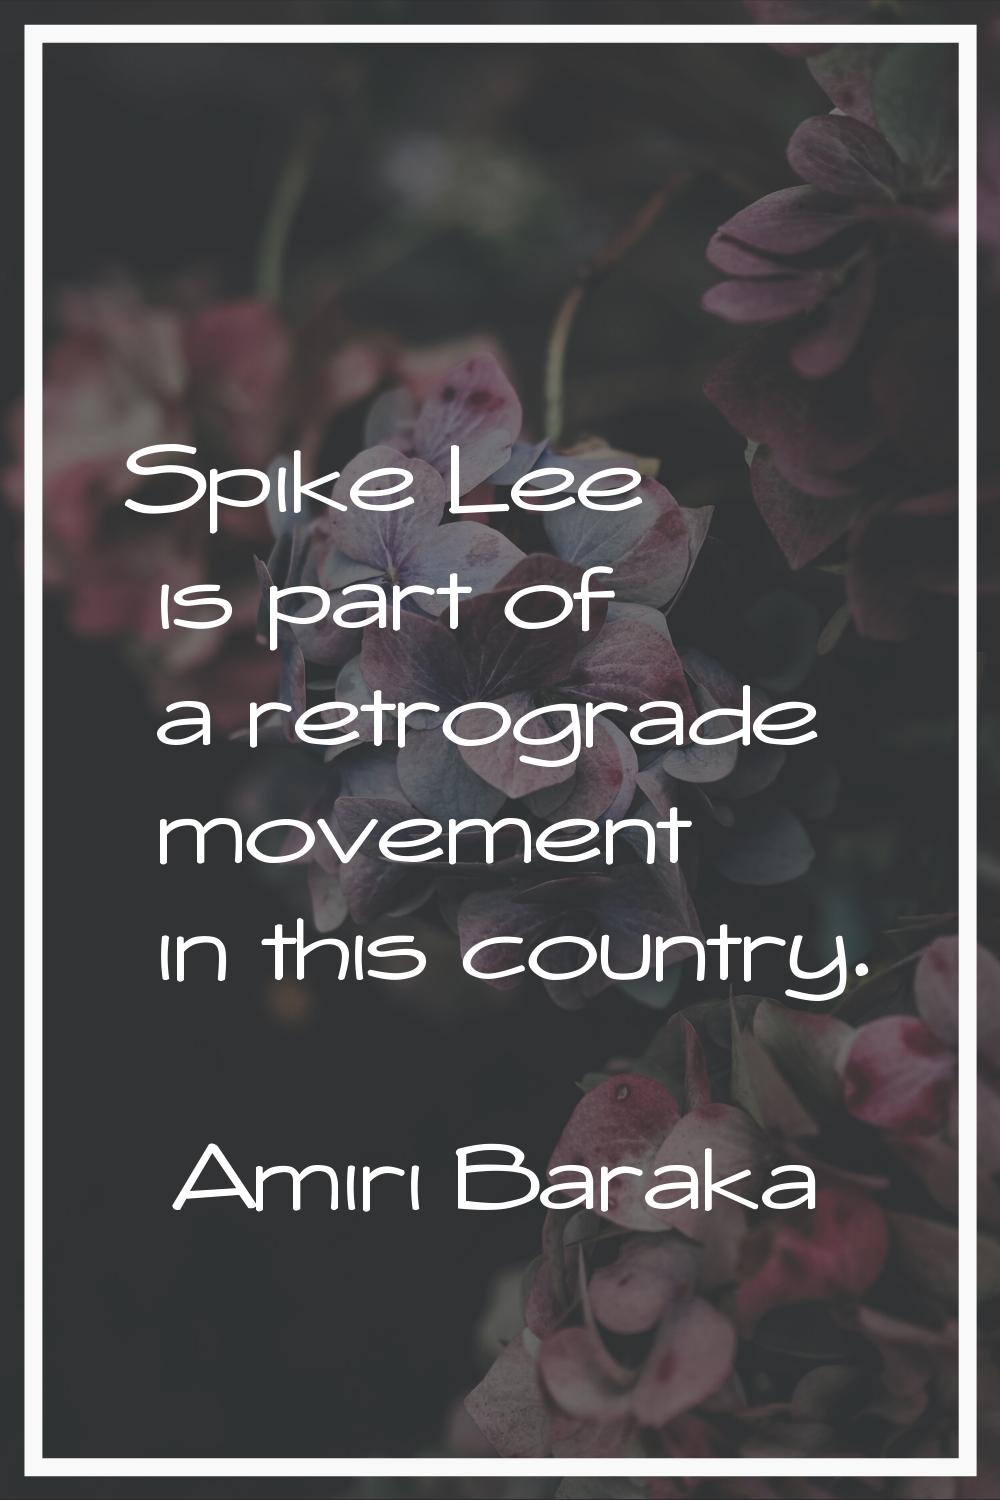 Spike Lee is part of a retrograde movement in this country.